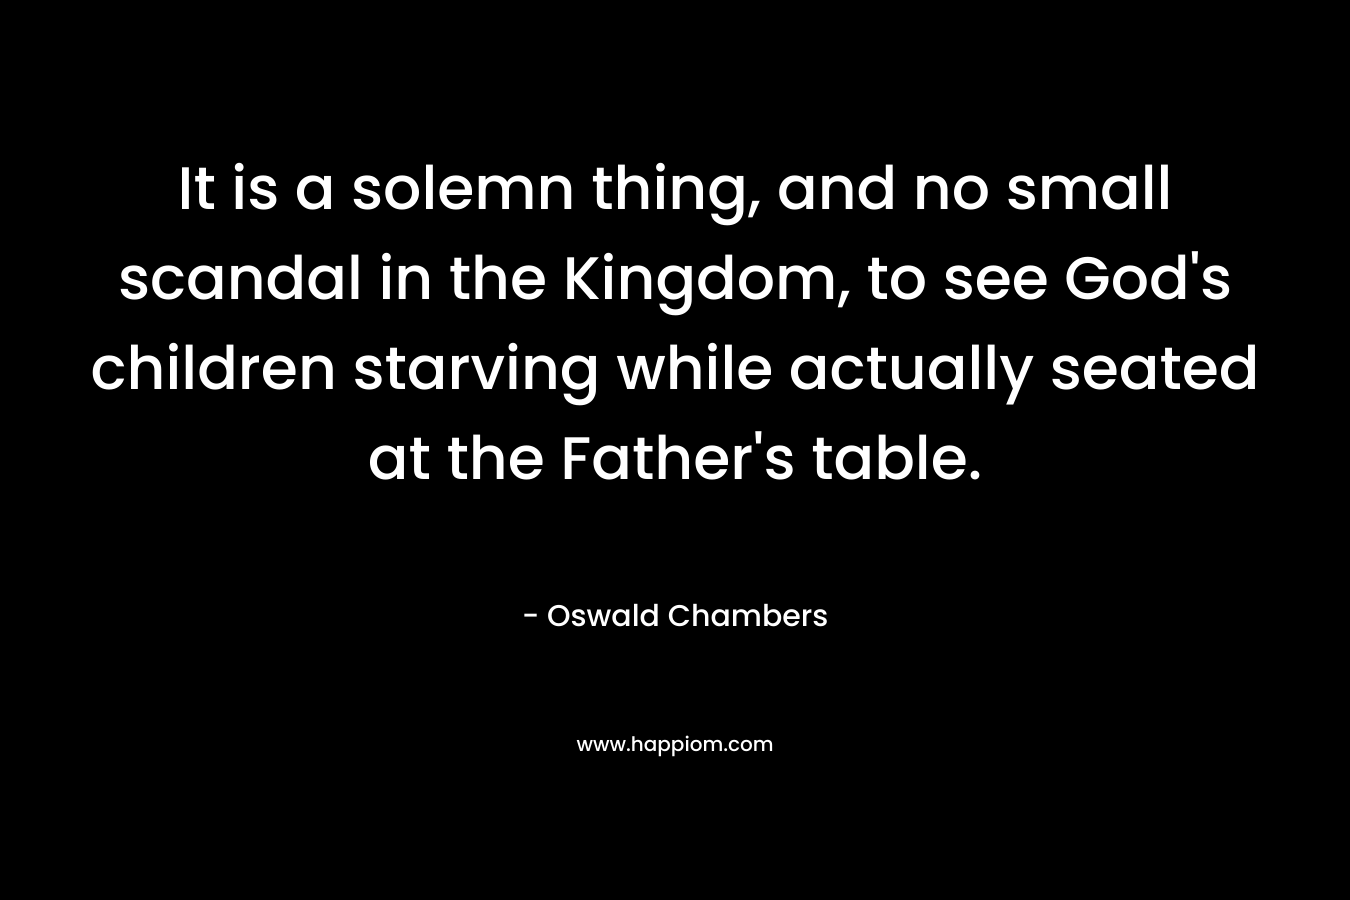 It is a solemn thing, and no small scandal in the Kingdom, to see God's children starving while actually seated at the Father's table.